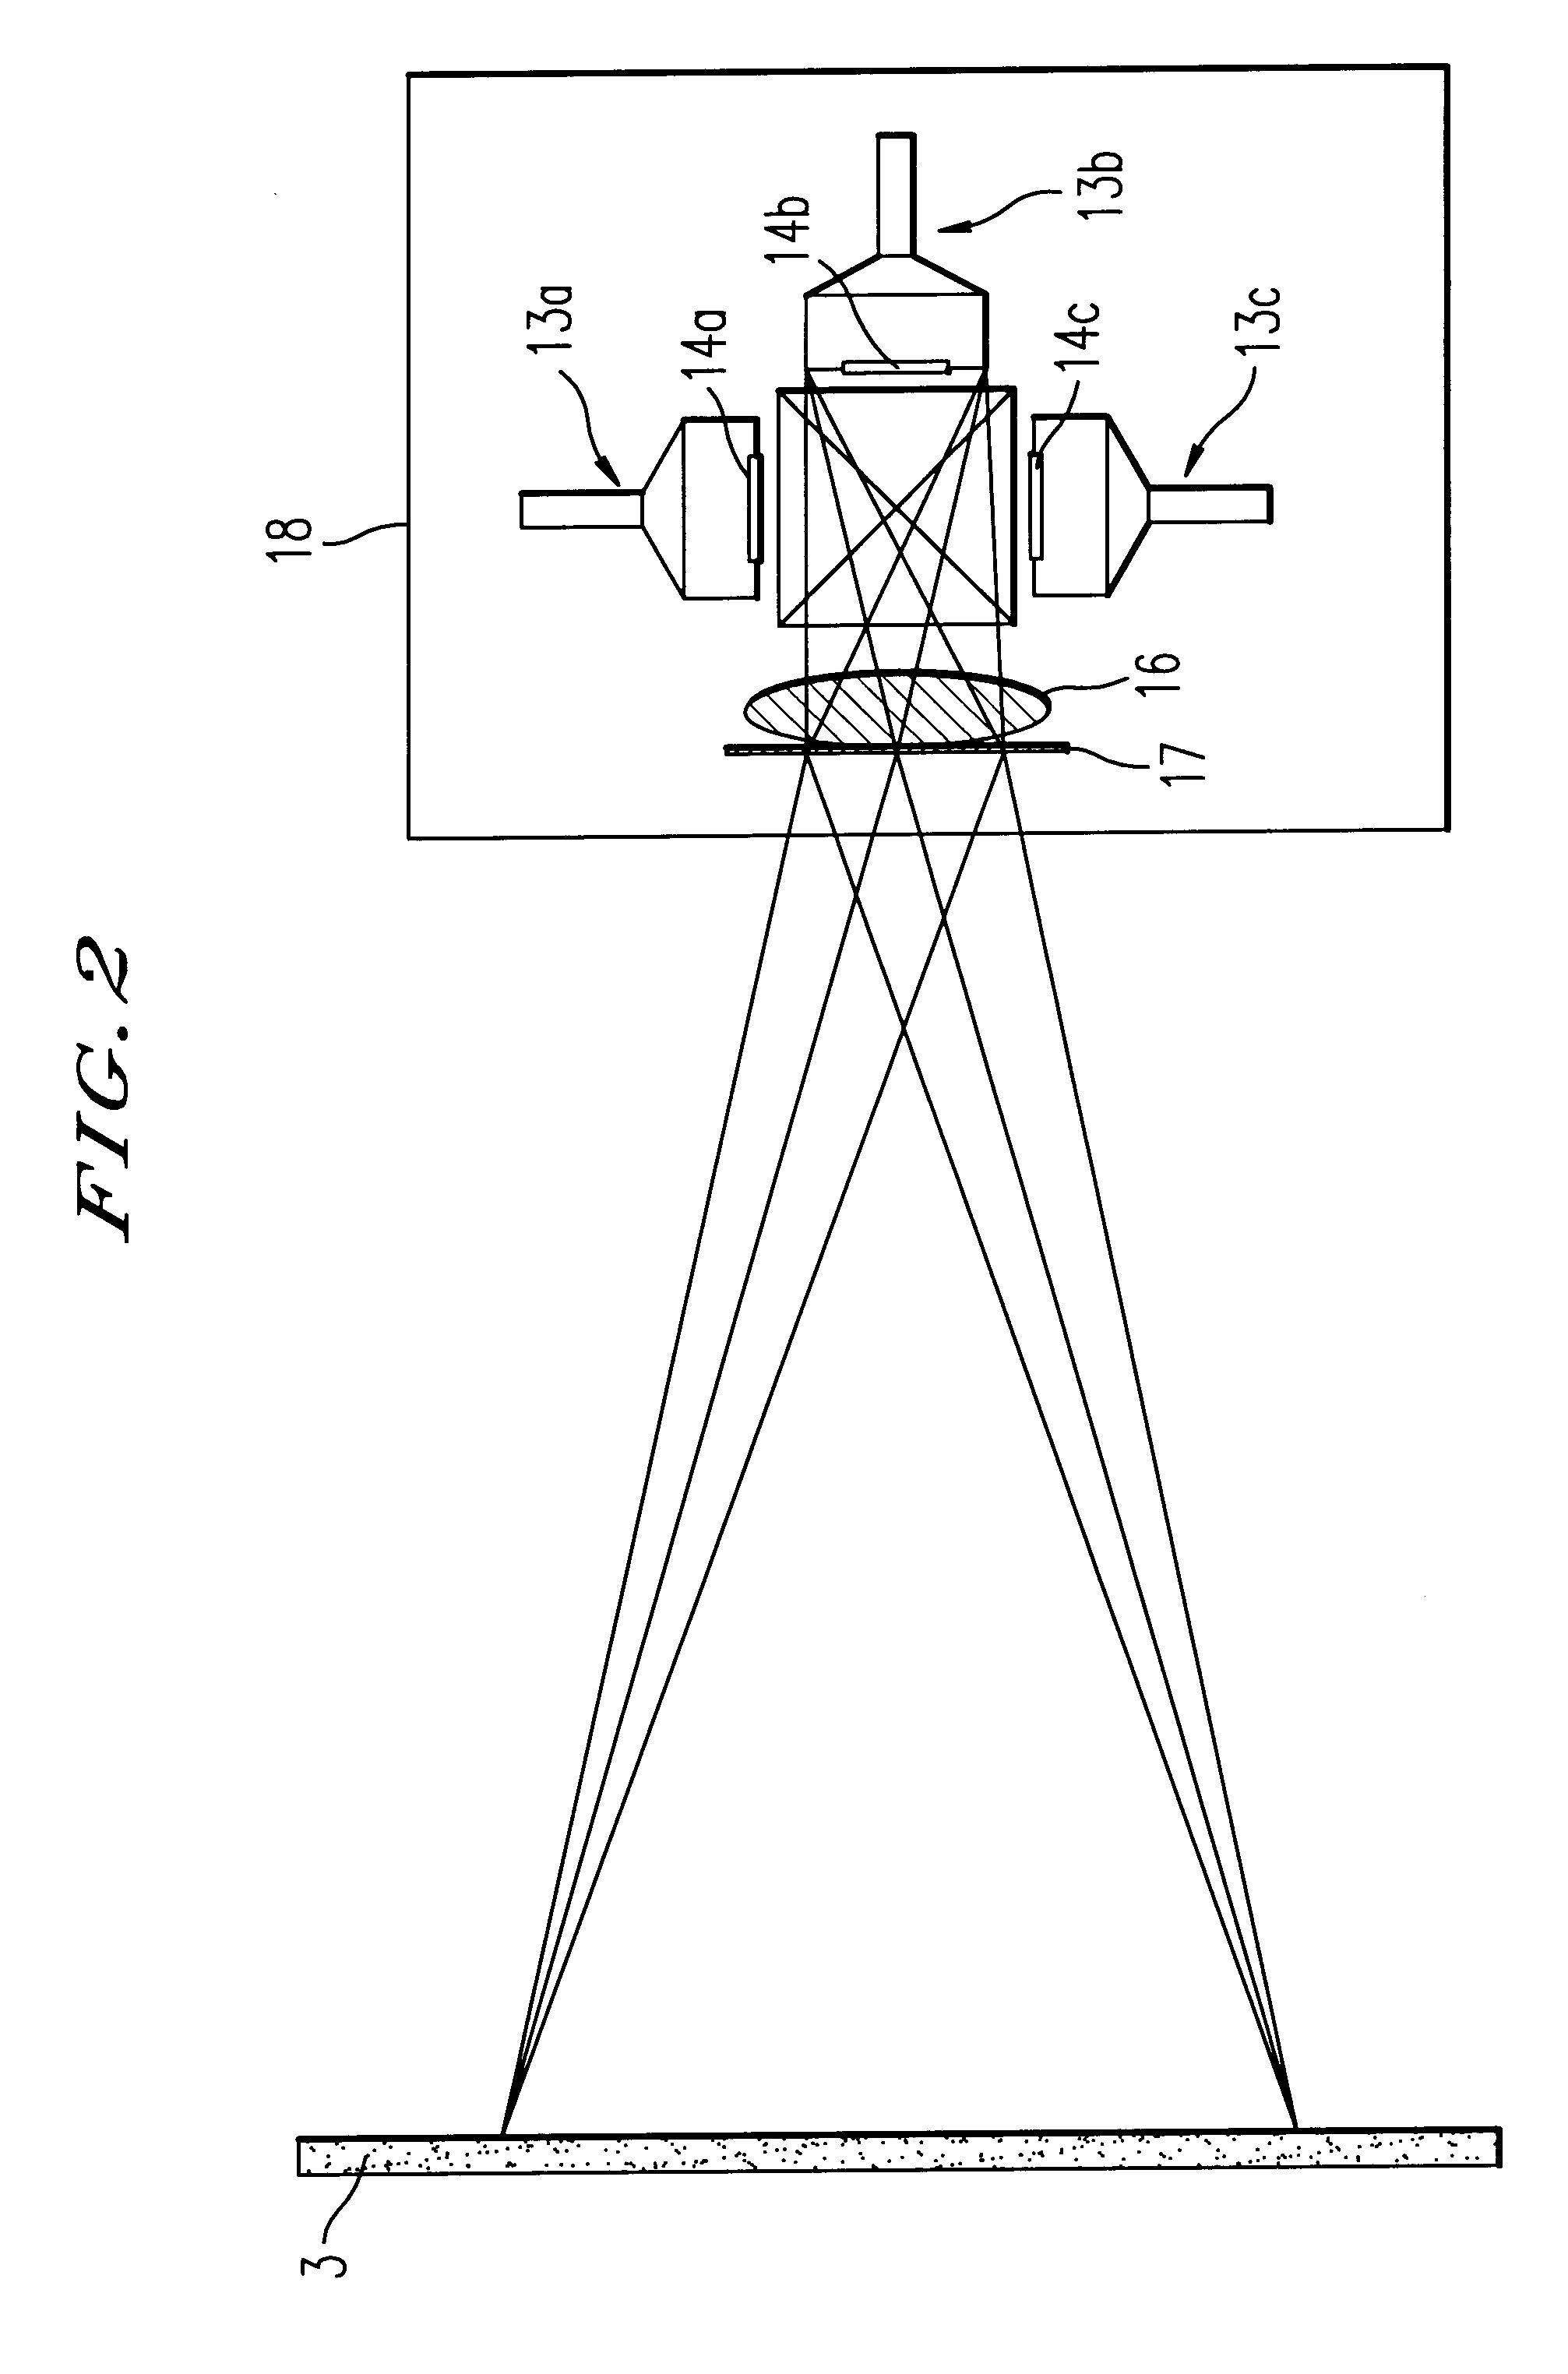 Multiview three-dimensional image display system